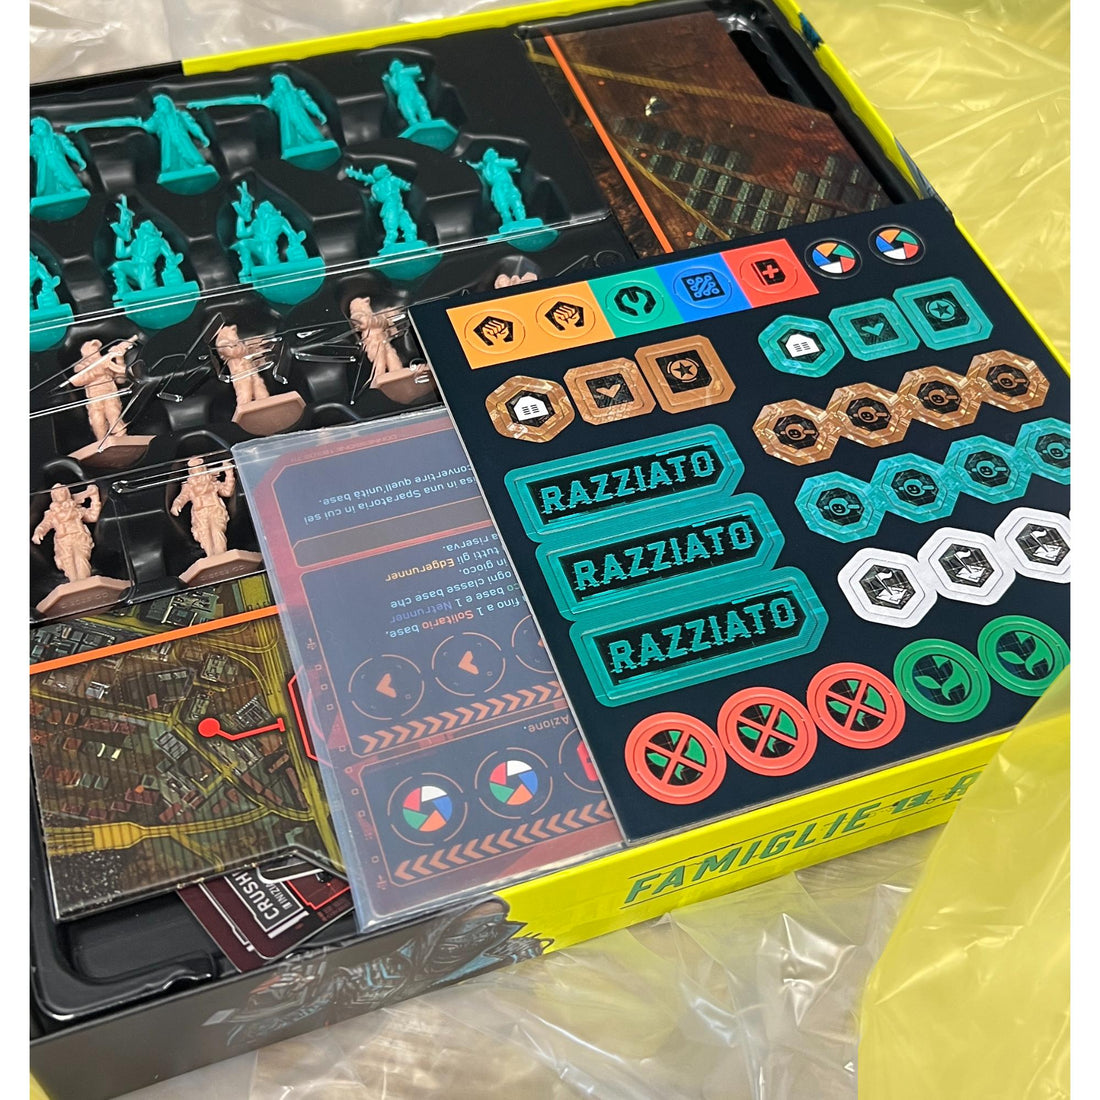 Cyberpunk 2077: The Board Game - Families and Outcasts